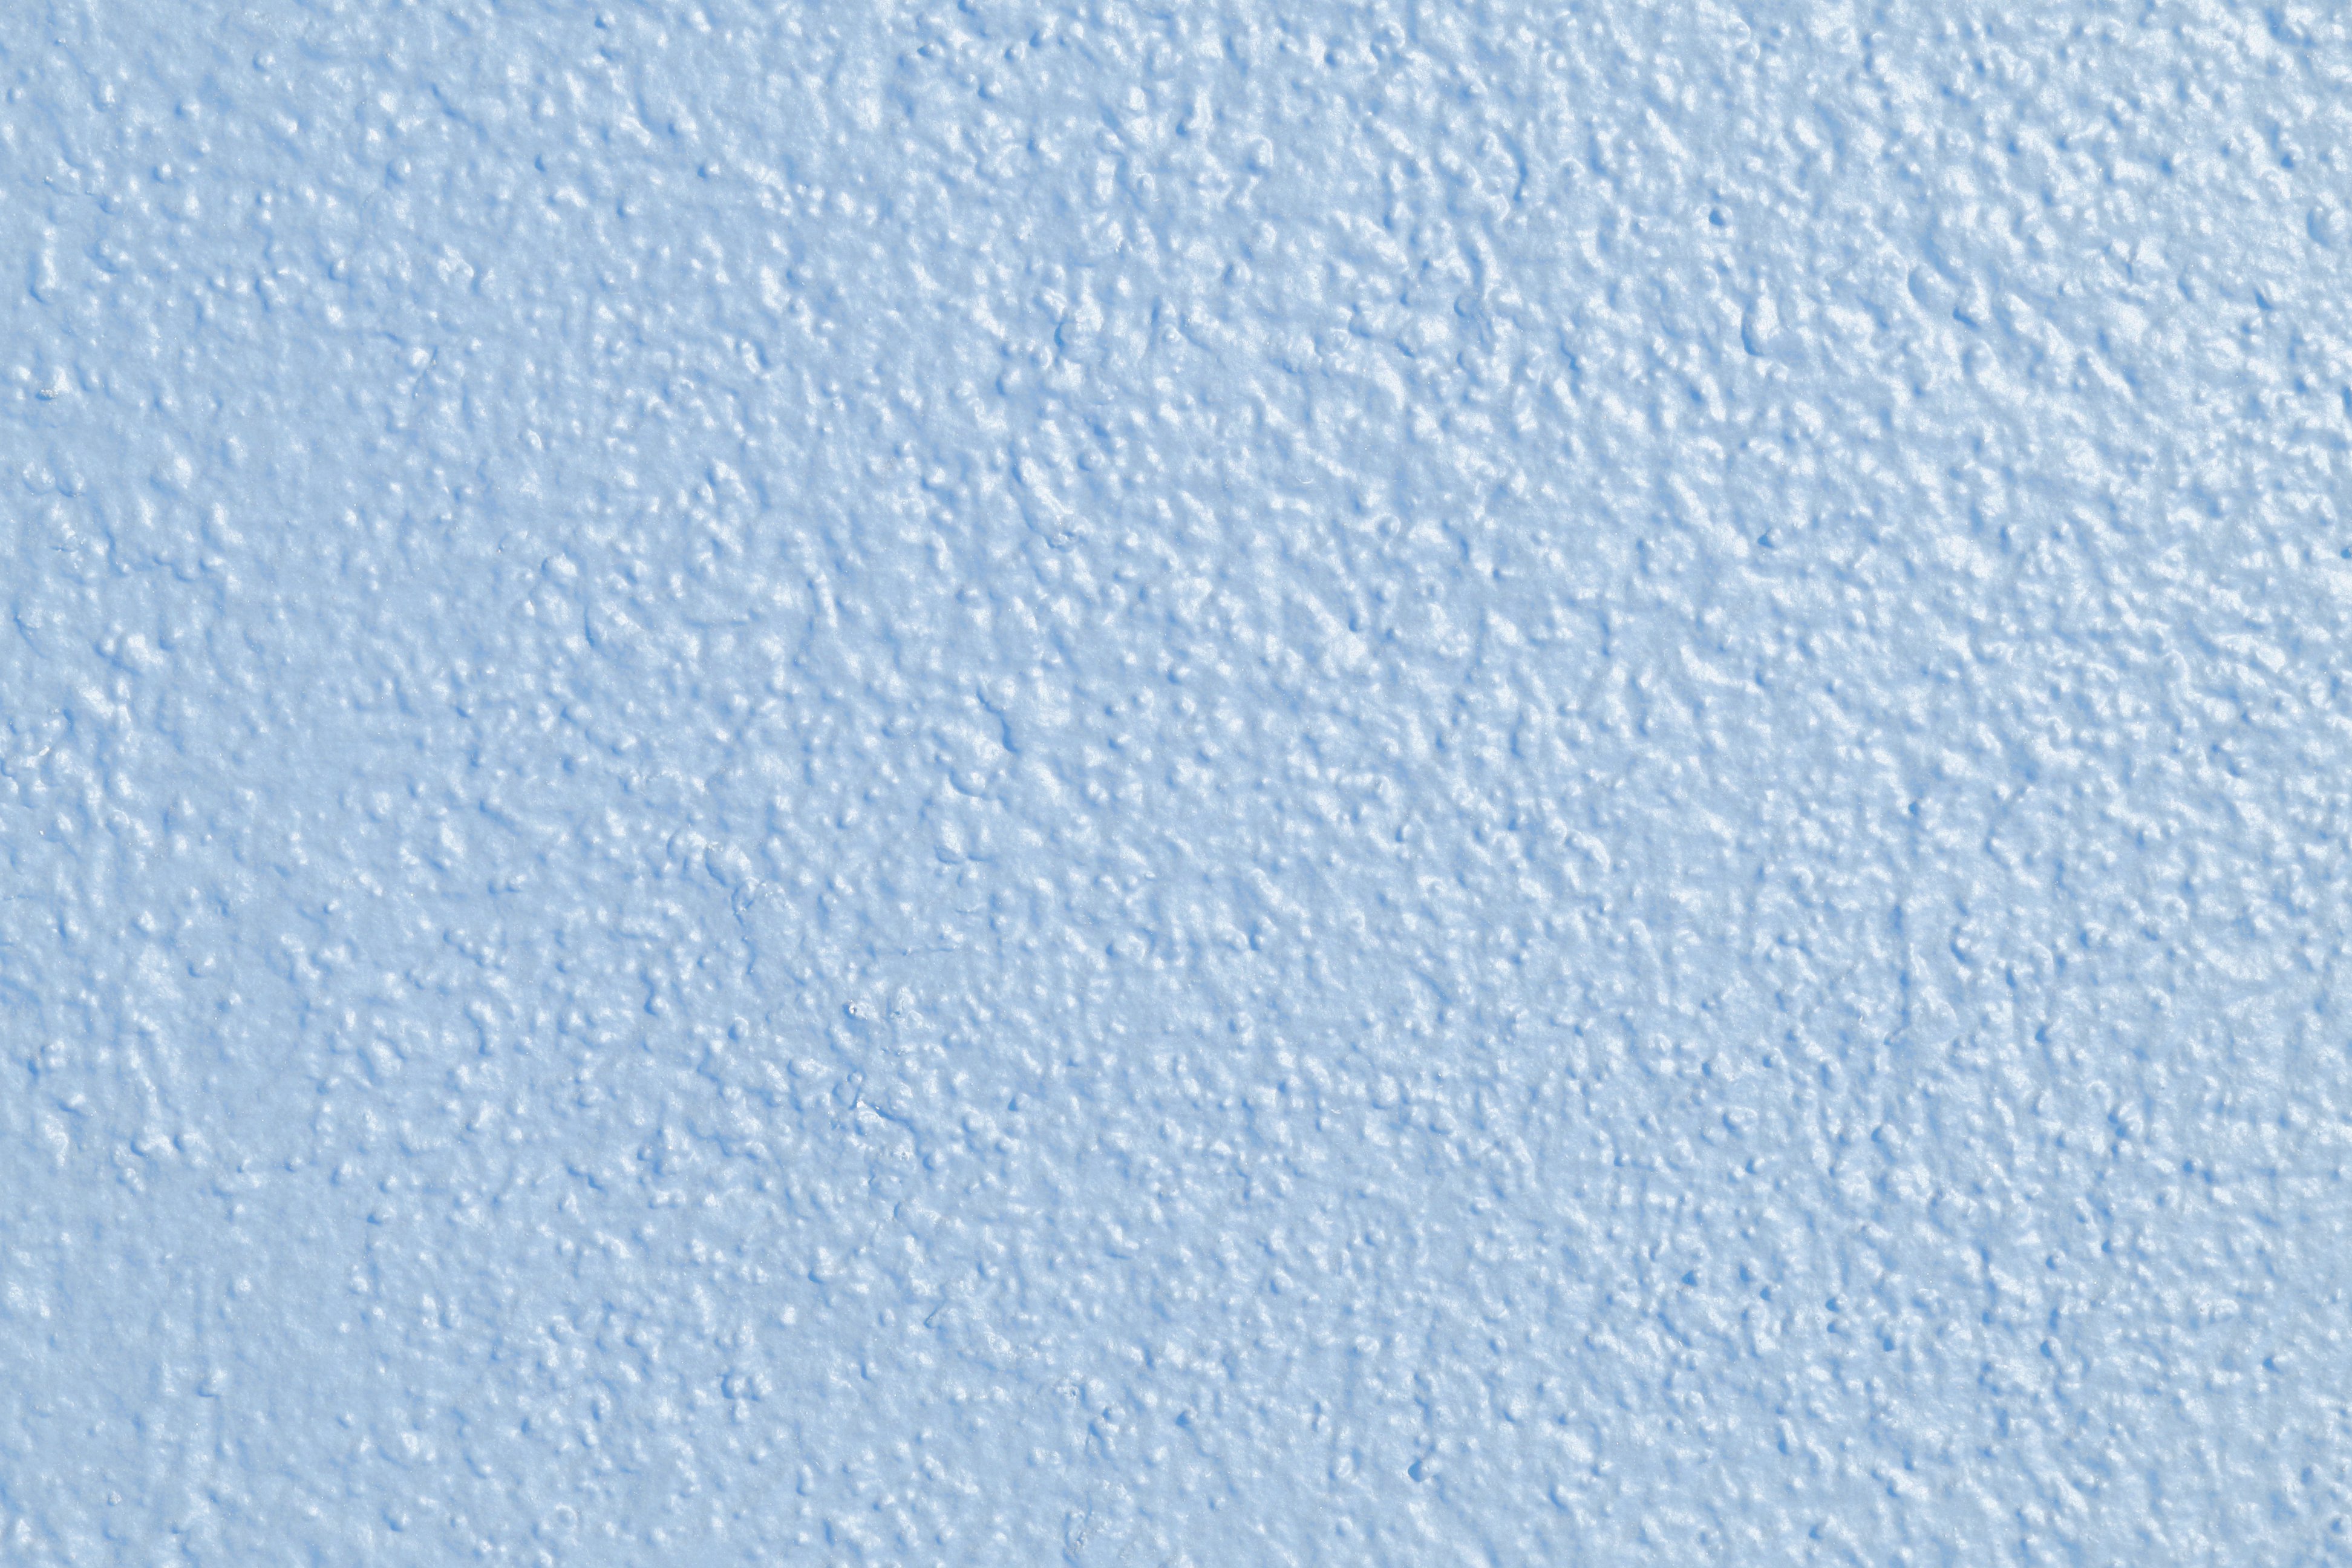 Baby Blue Painted Wall Texture Picture | Free Photograph | Photos ...